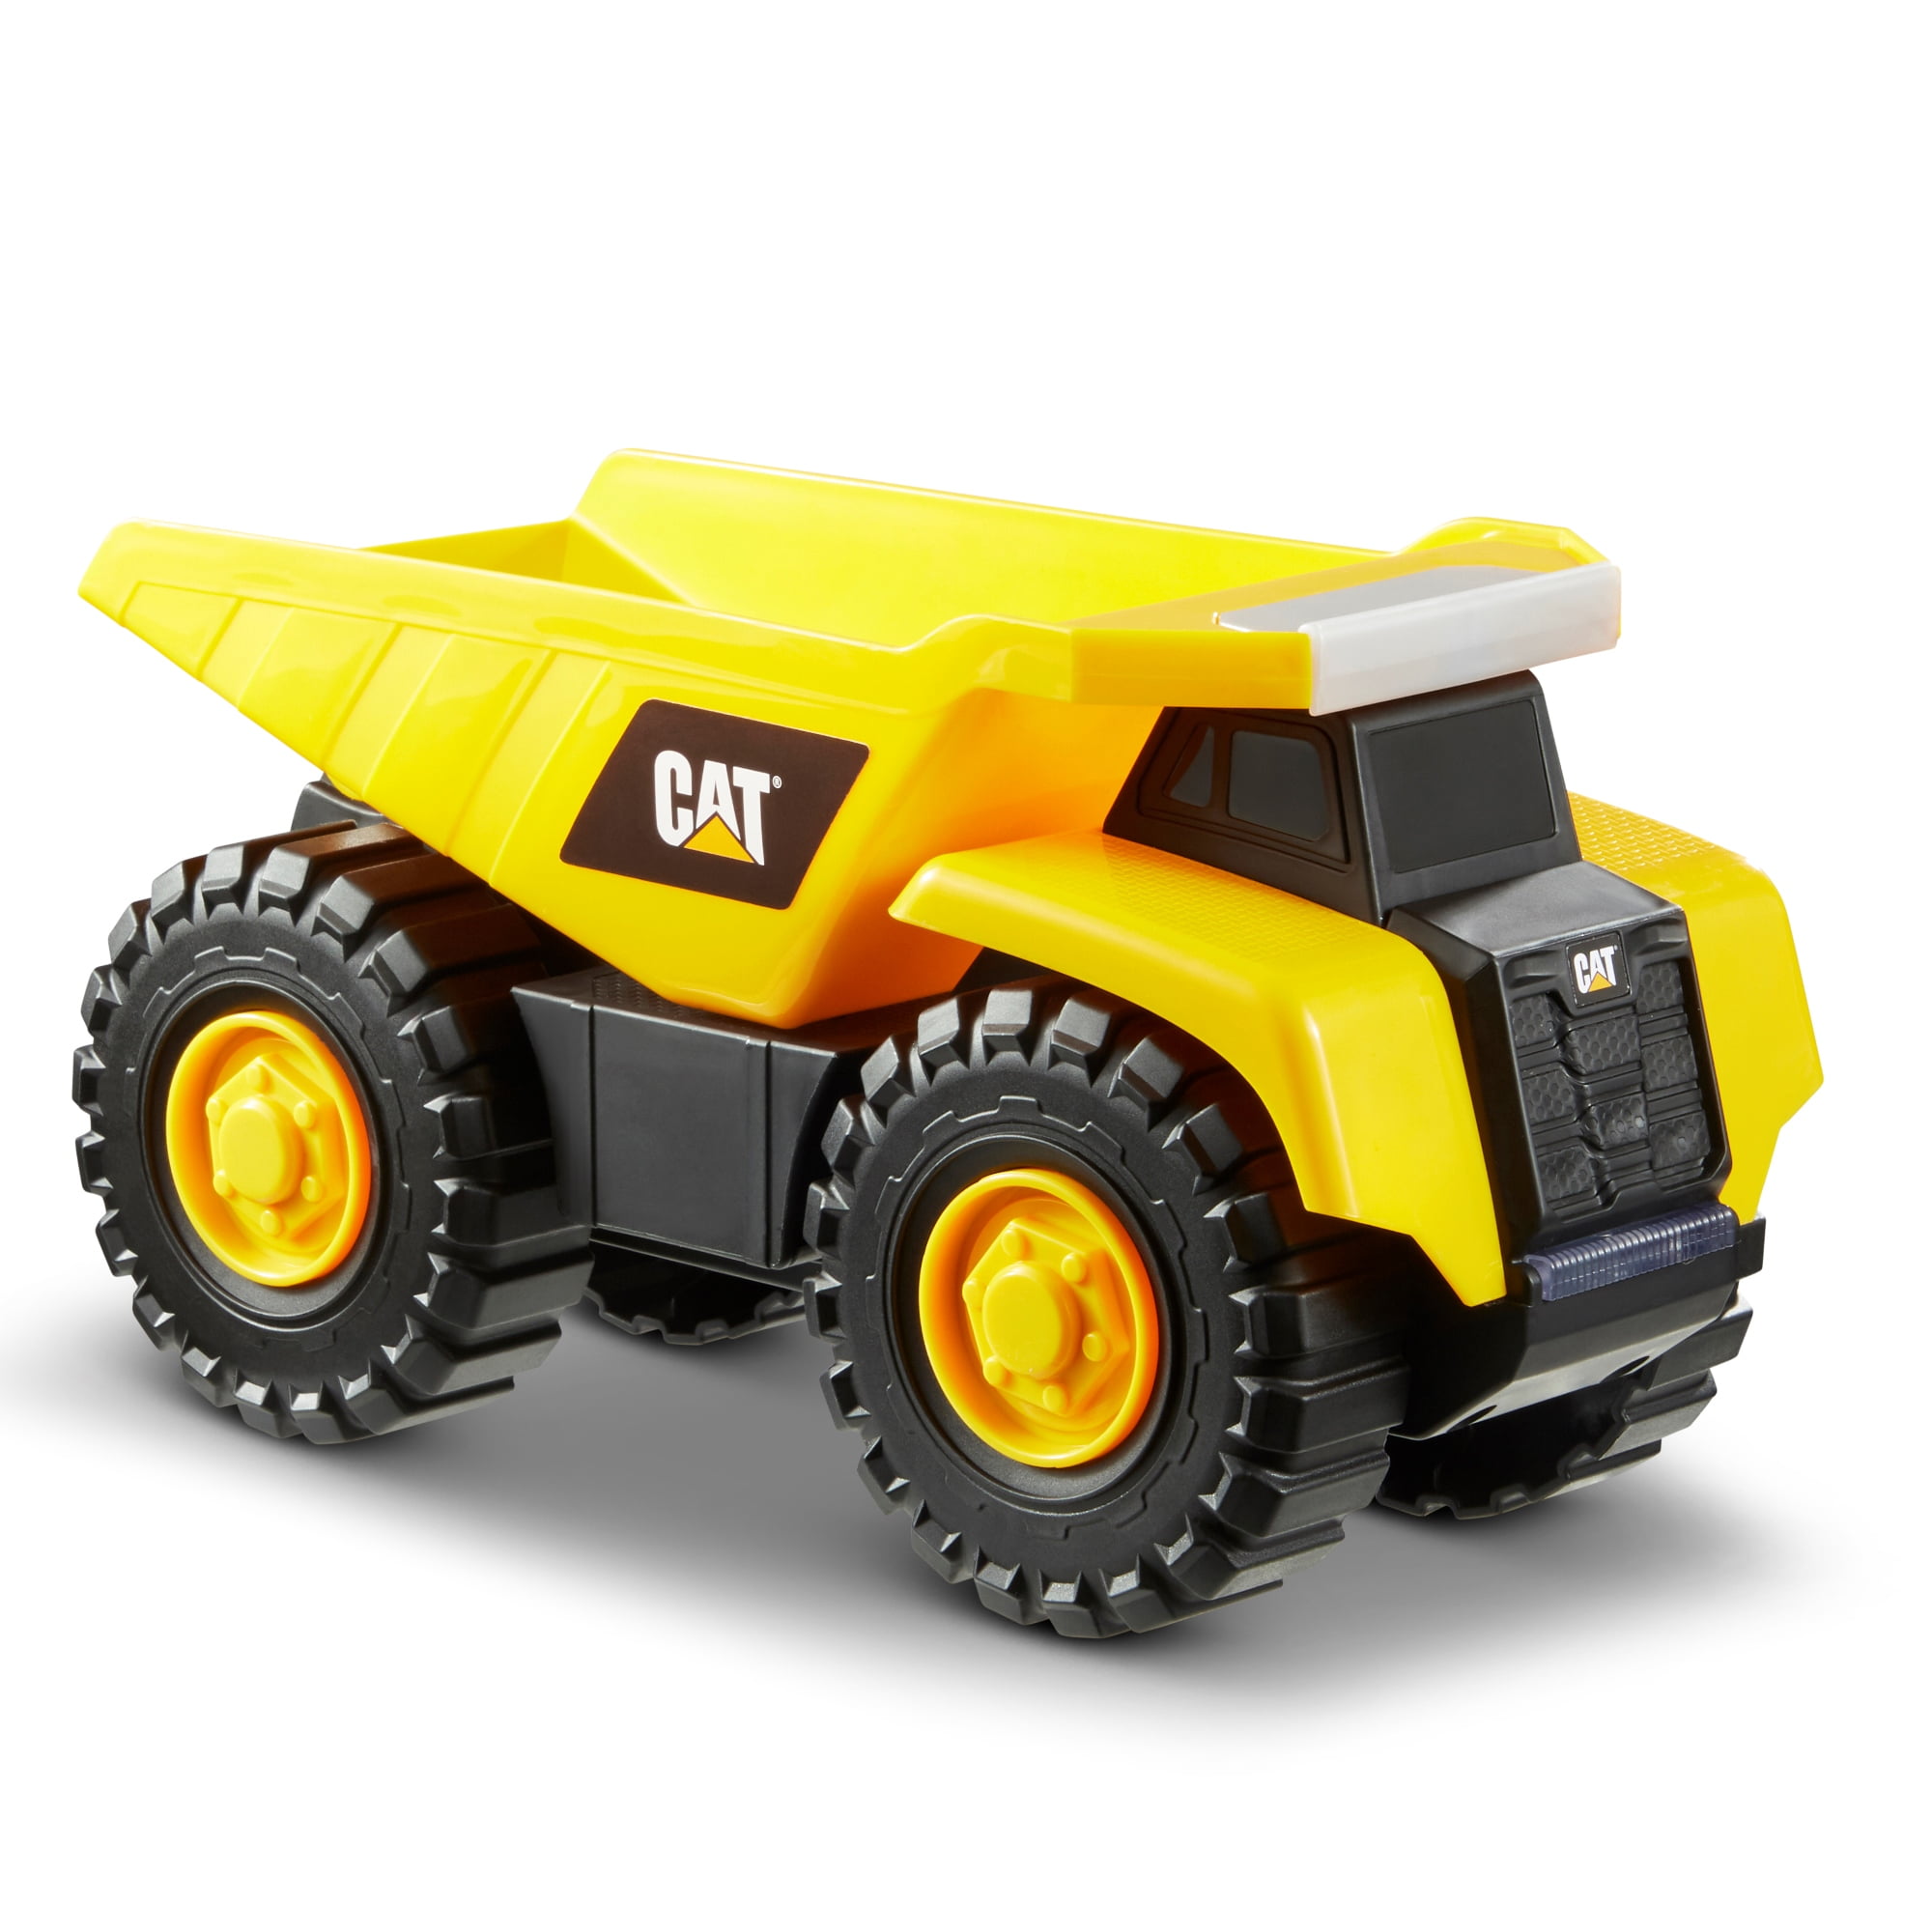 Cat Construction Tough Machines Toy Dump Truck with Lights & Sounds Yellow 